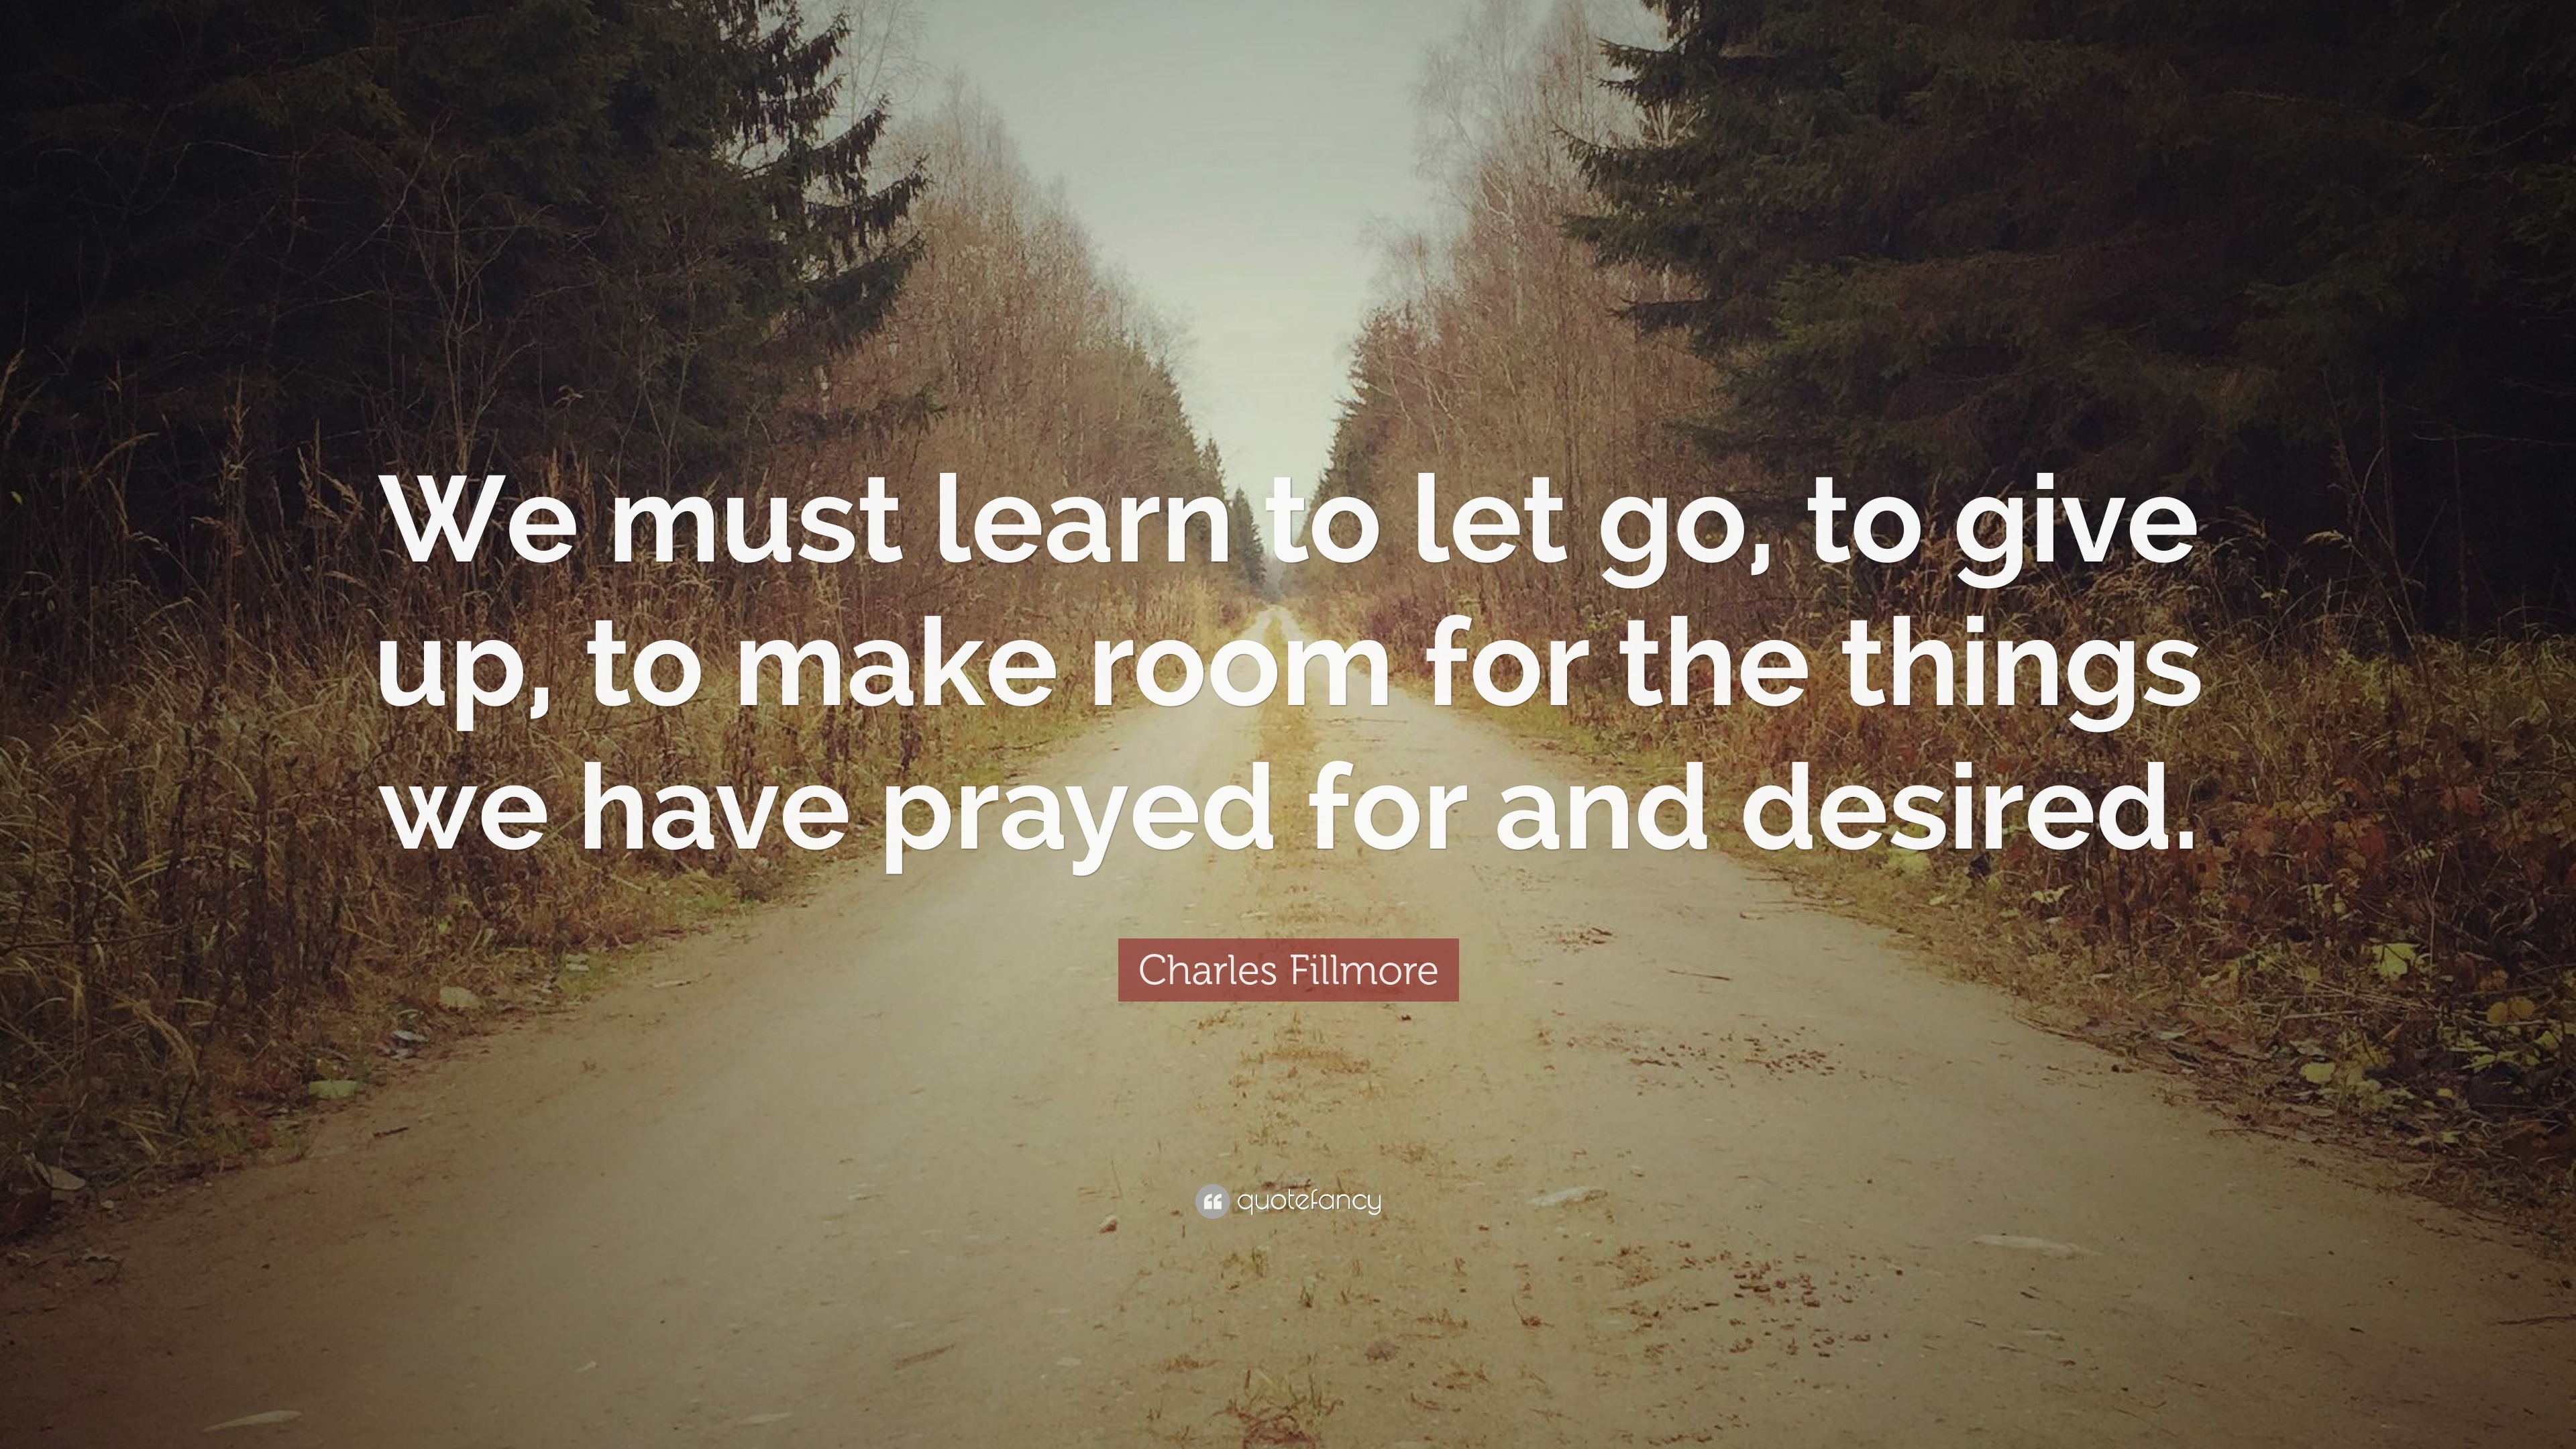 Charles Fillmore Quote: “We must learn to let go, to give up, to make ...